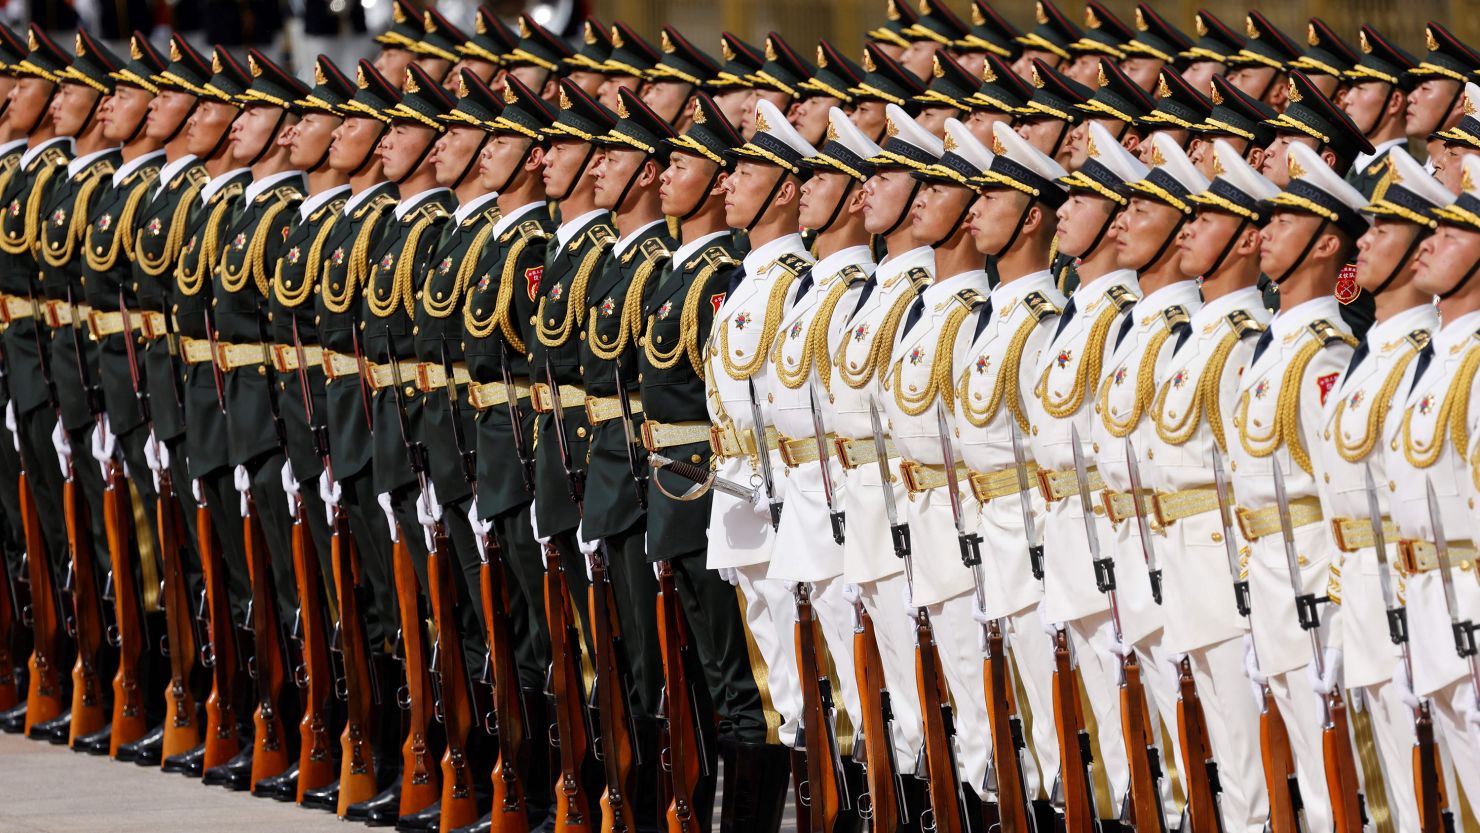 Xi Jinping Reorganizes China's Military, Thinks How to “Fight and Win” Future Wars